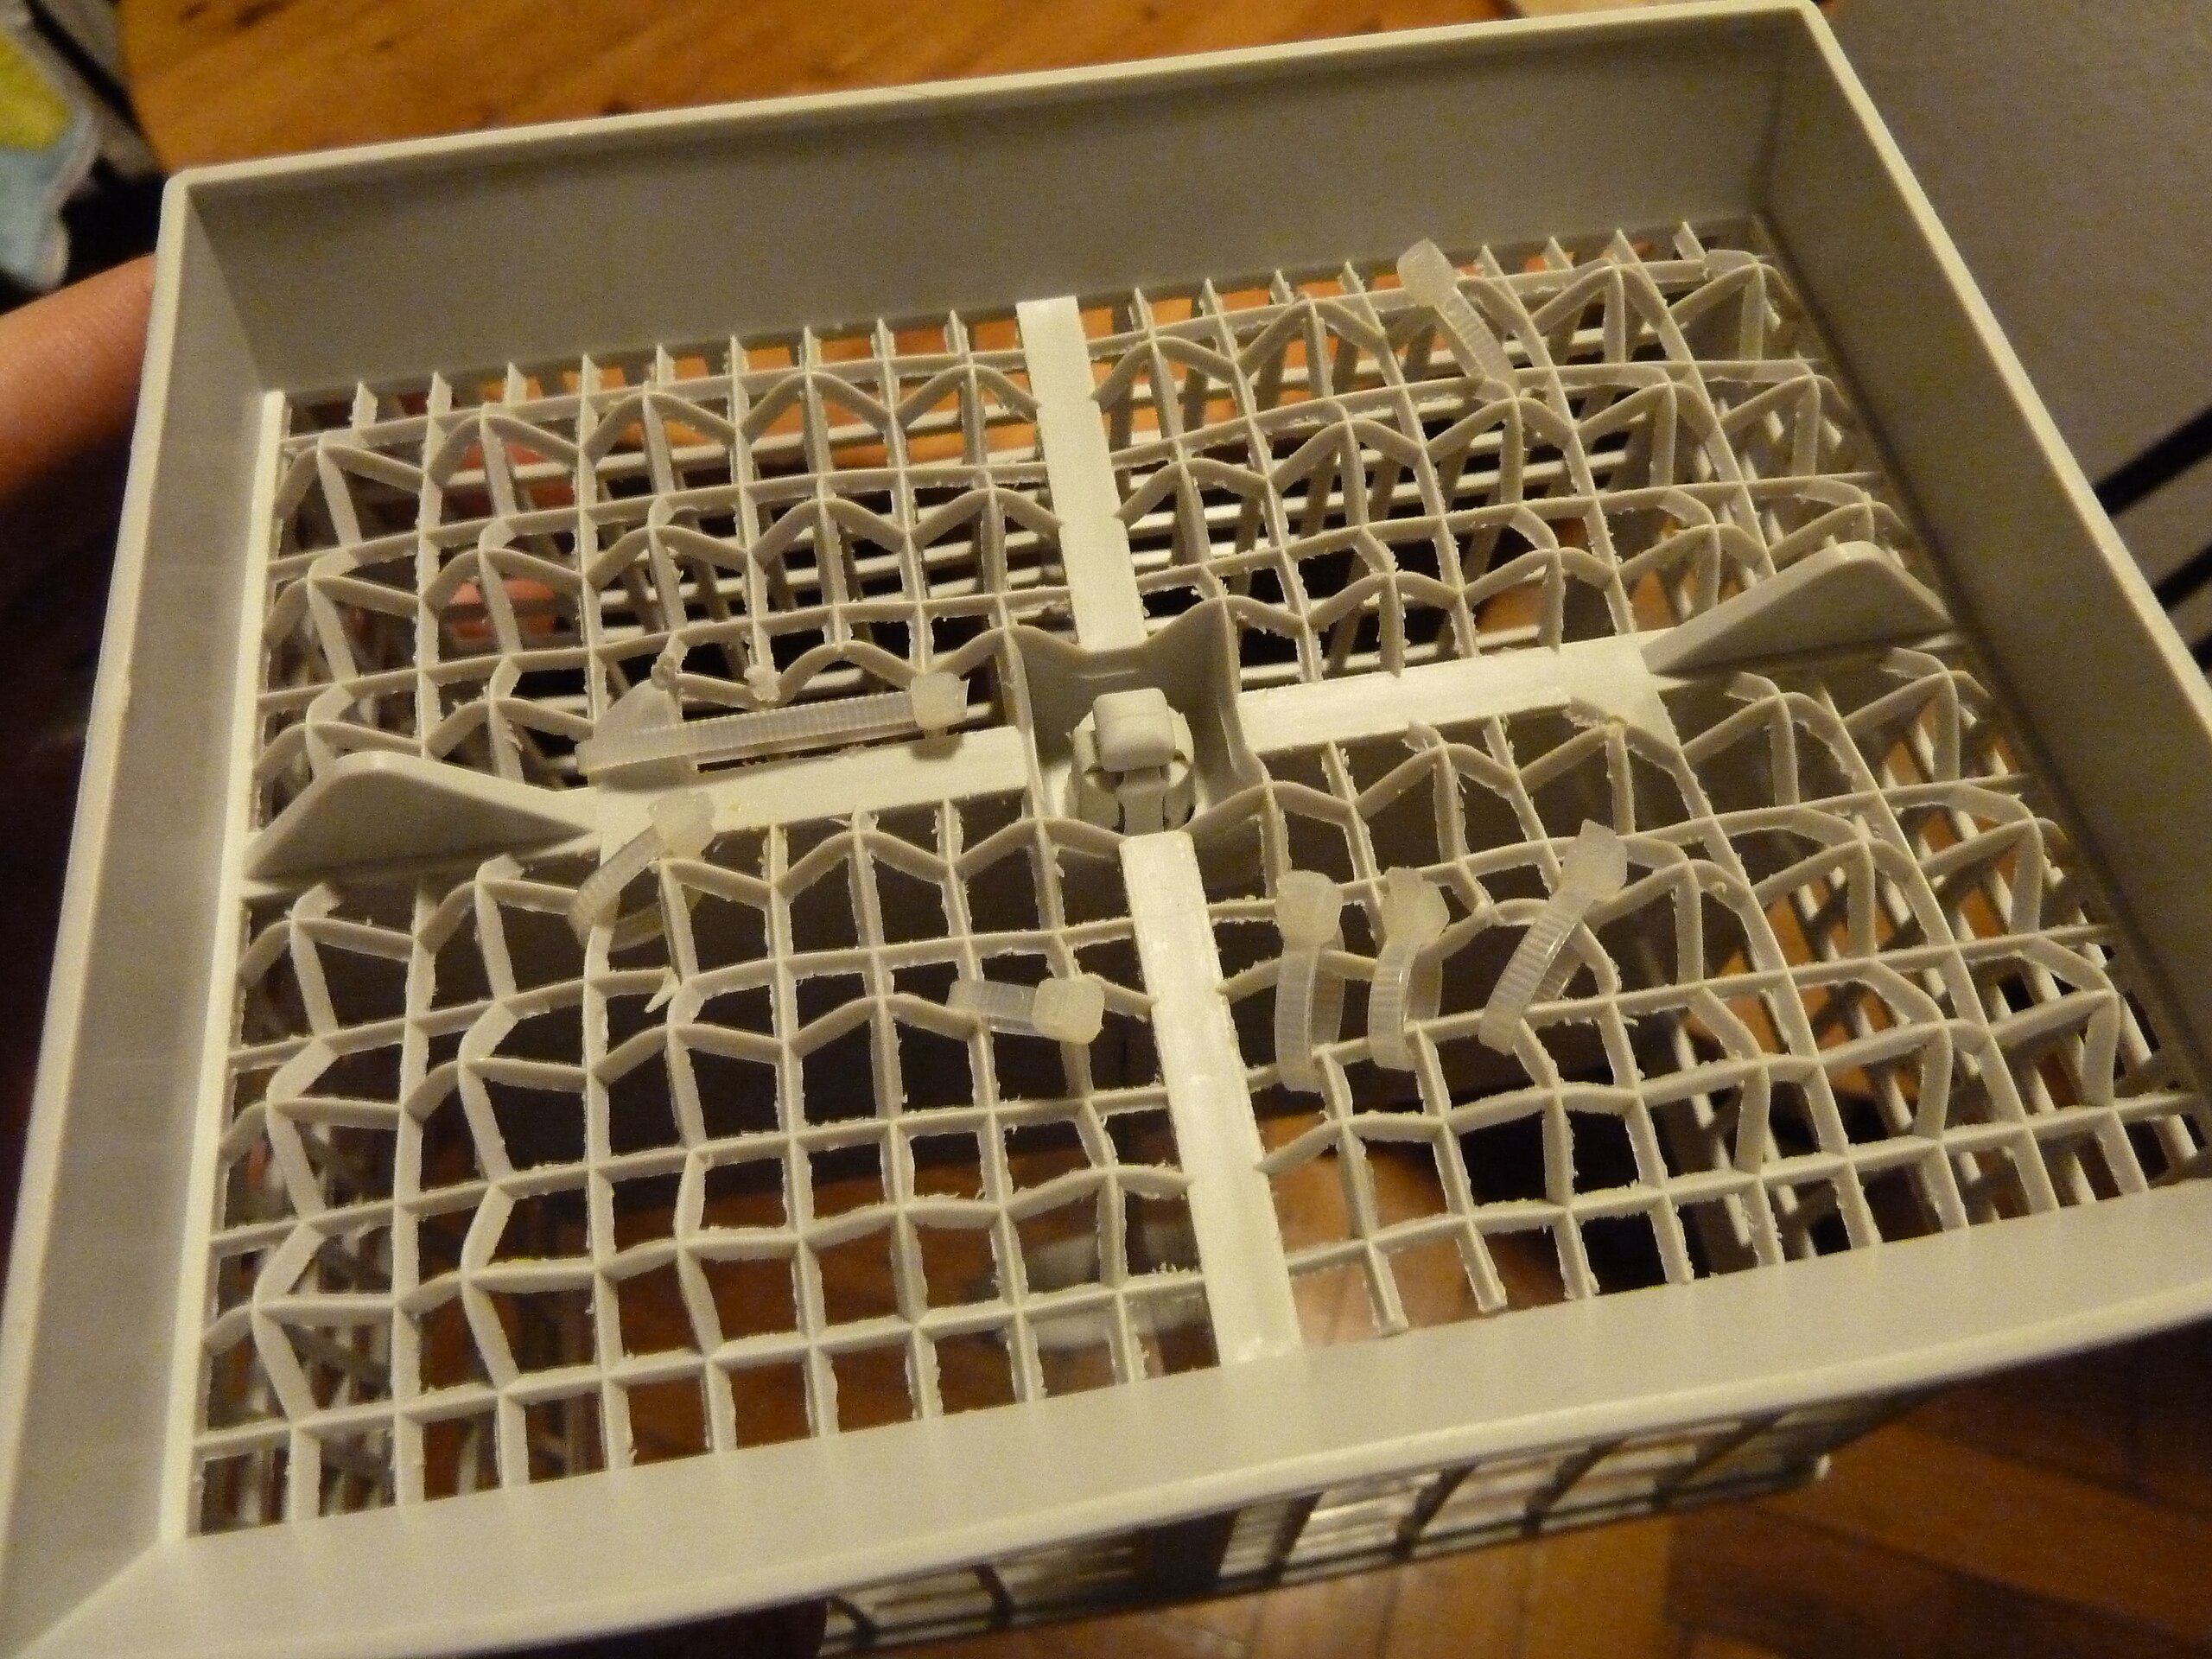 File:Dishwasher basket Cable tie.JPG - Wikimedia Commons